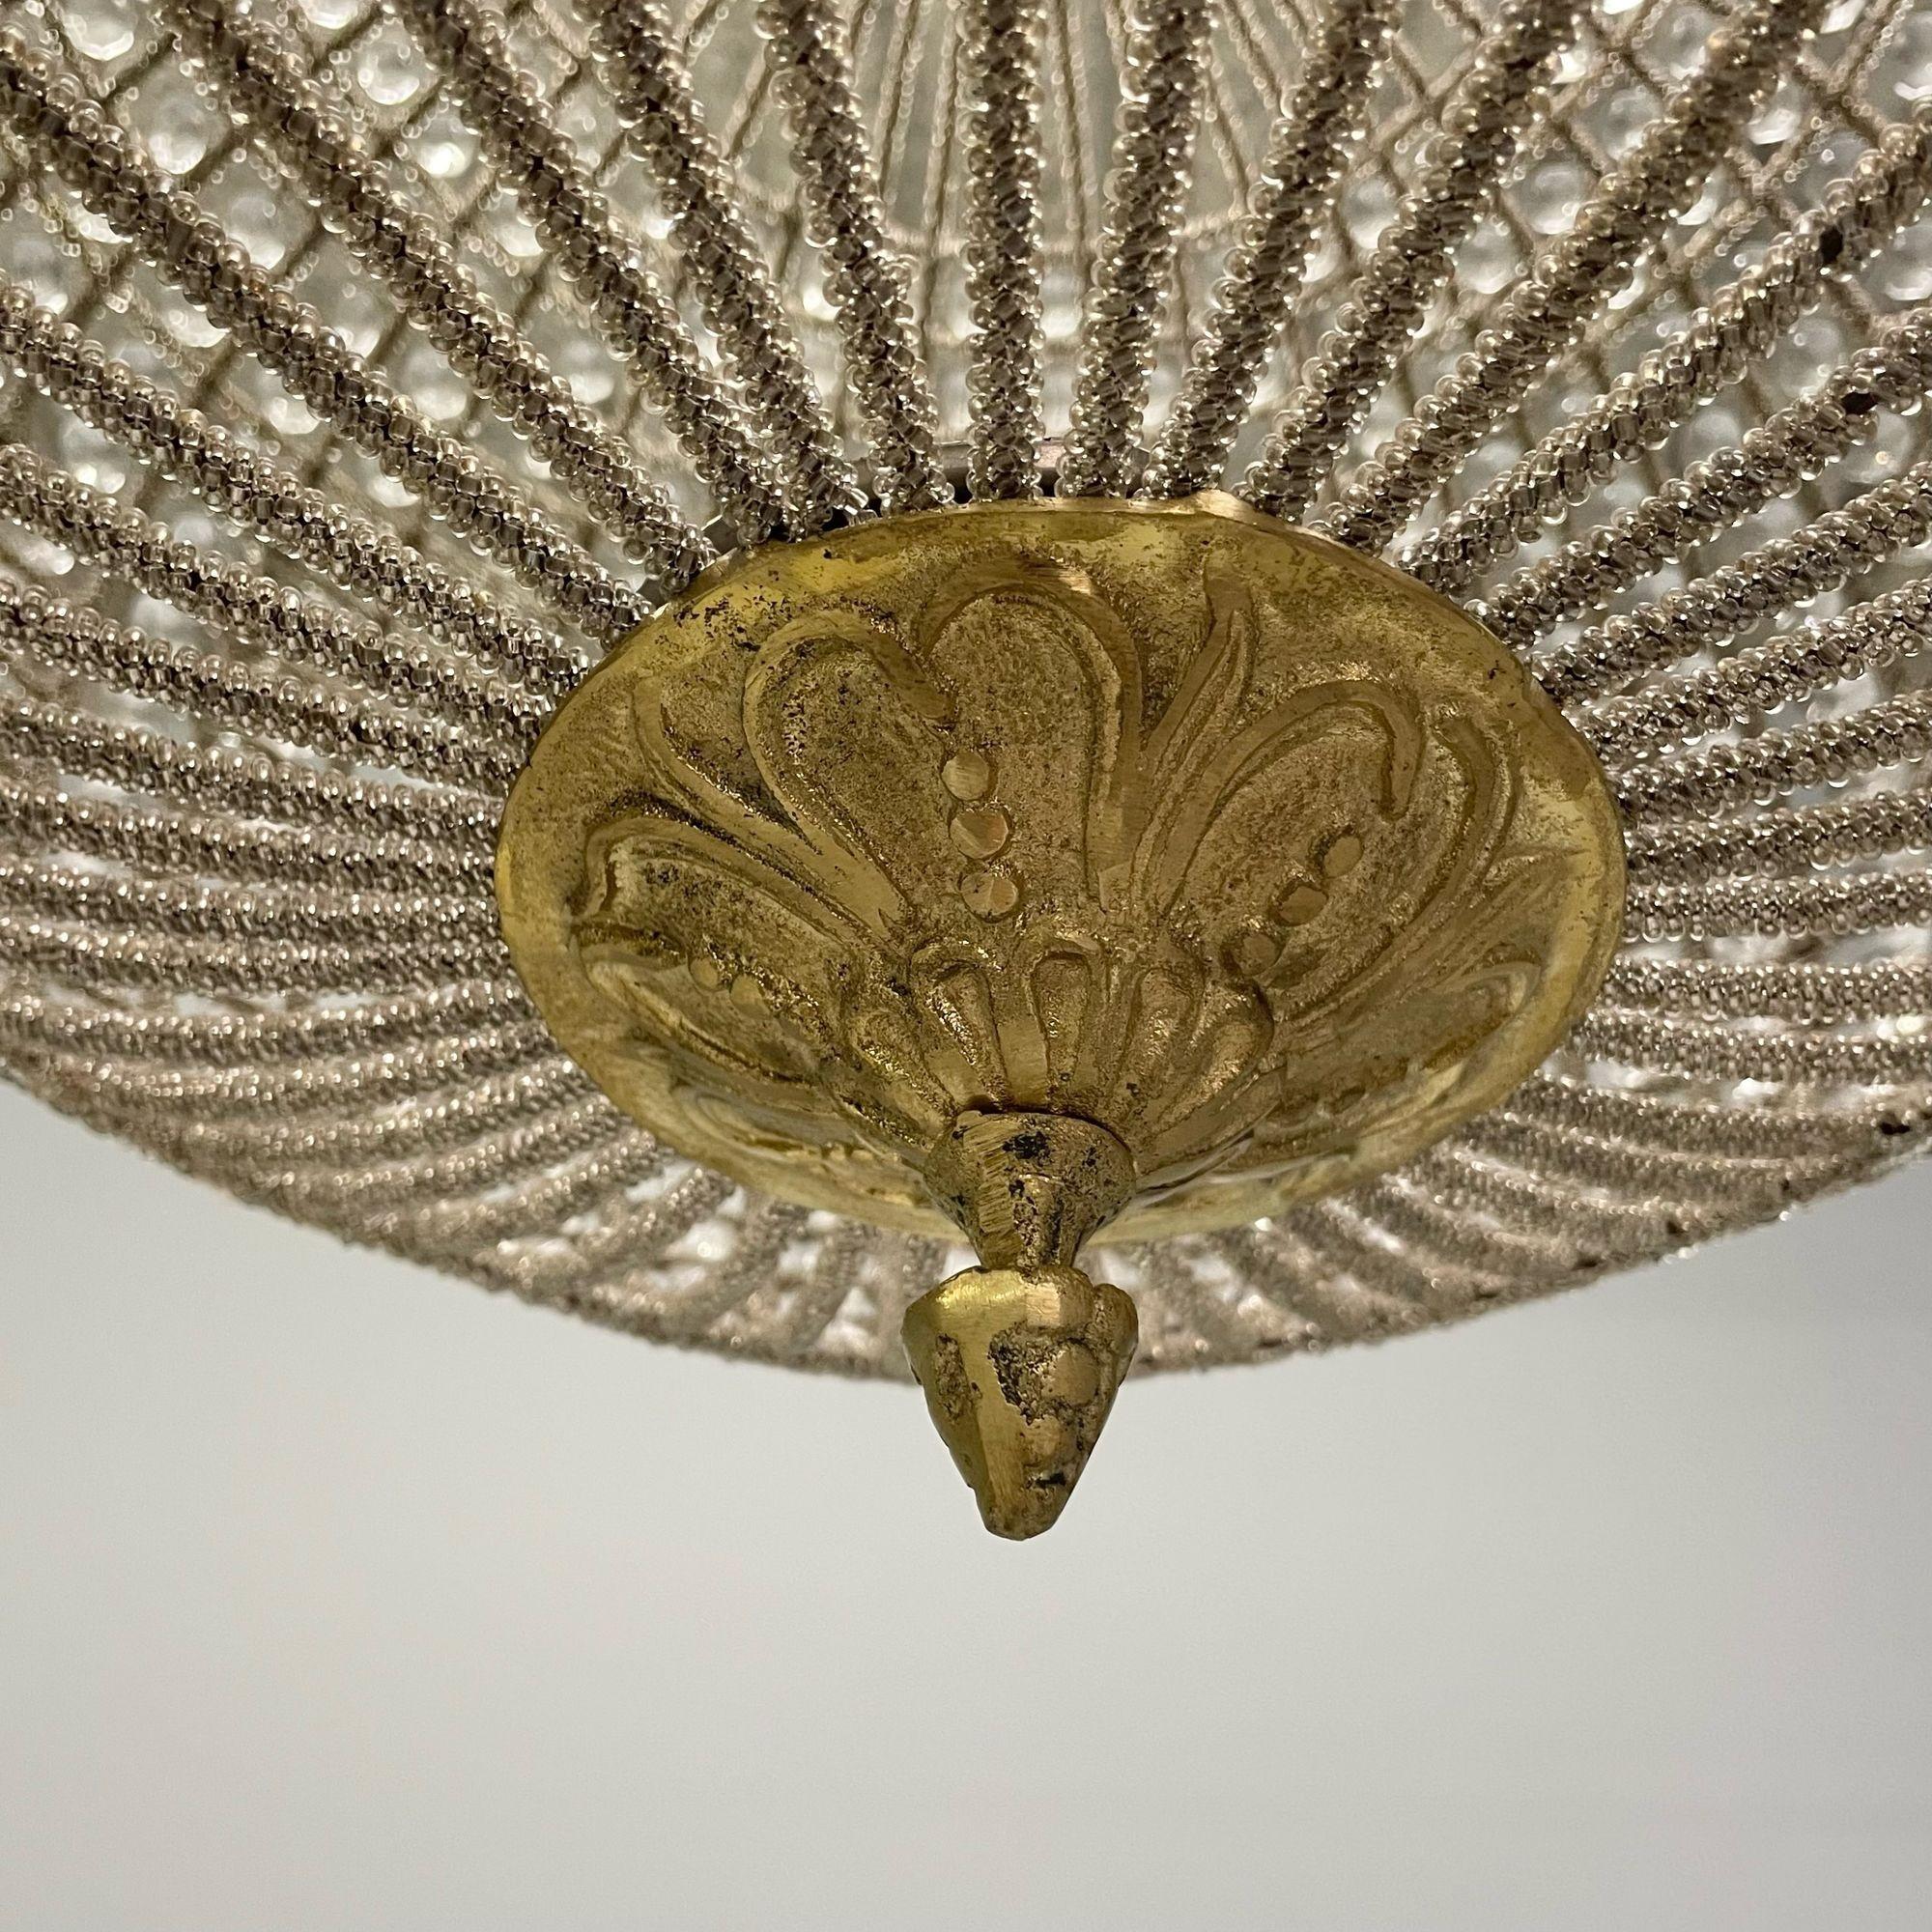 Art Deco, Round Chandeliers, Beveled Crystal, Metal, American, 1980s For Sale 3